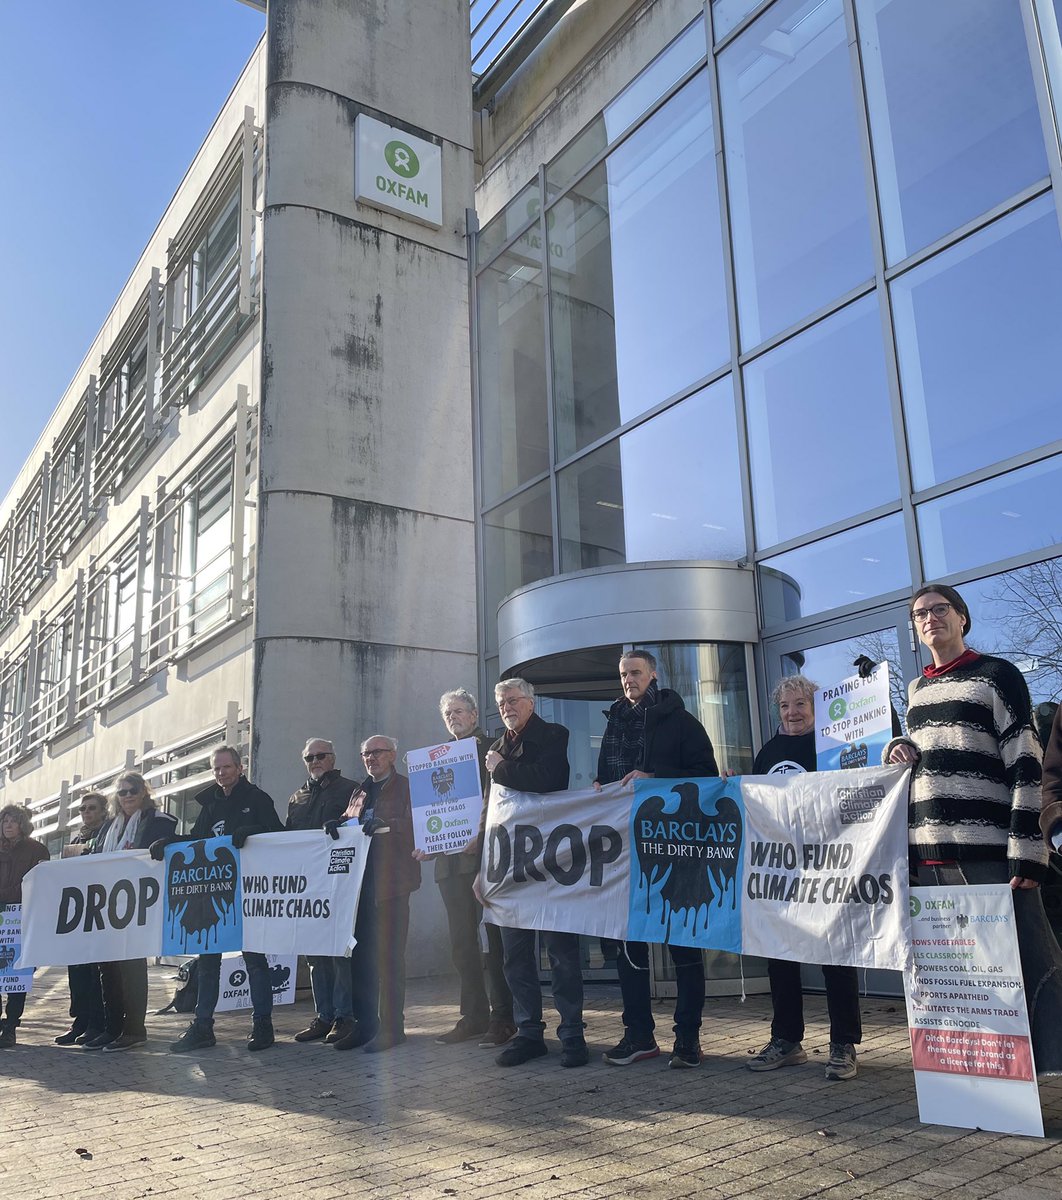 Great news that Oxfam are dropping Barclays. Photo below from @CClimateAction visit to Oxfam HQ in Oxford last Friday. #DropBarclays